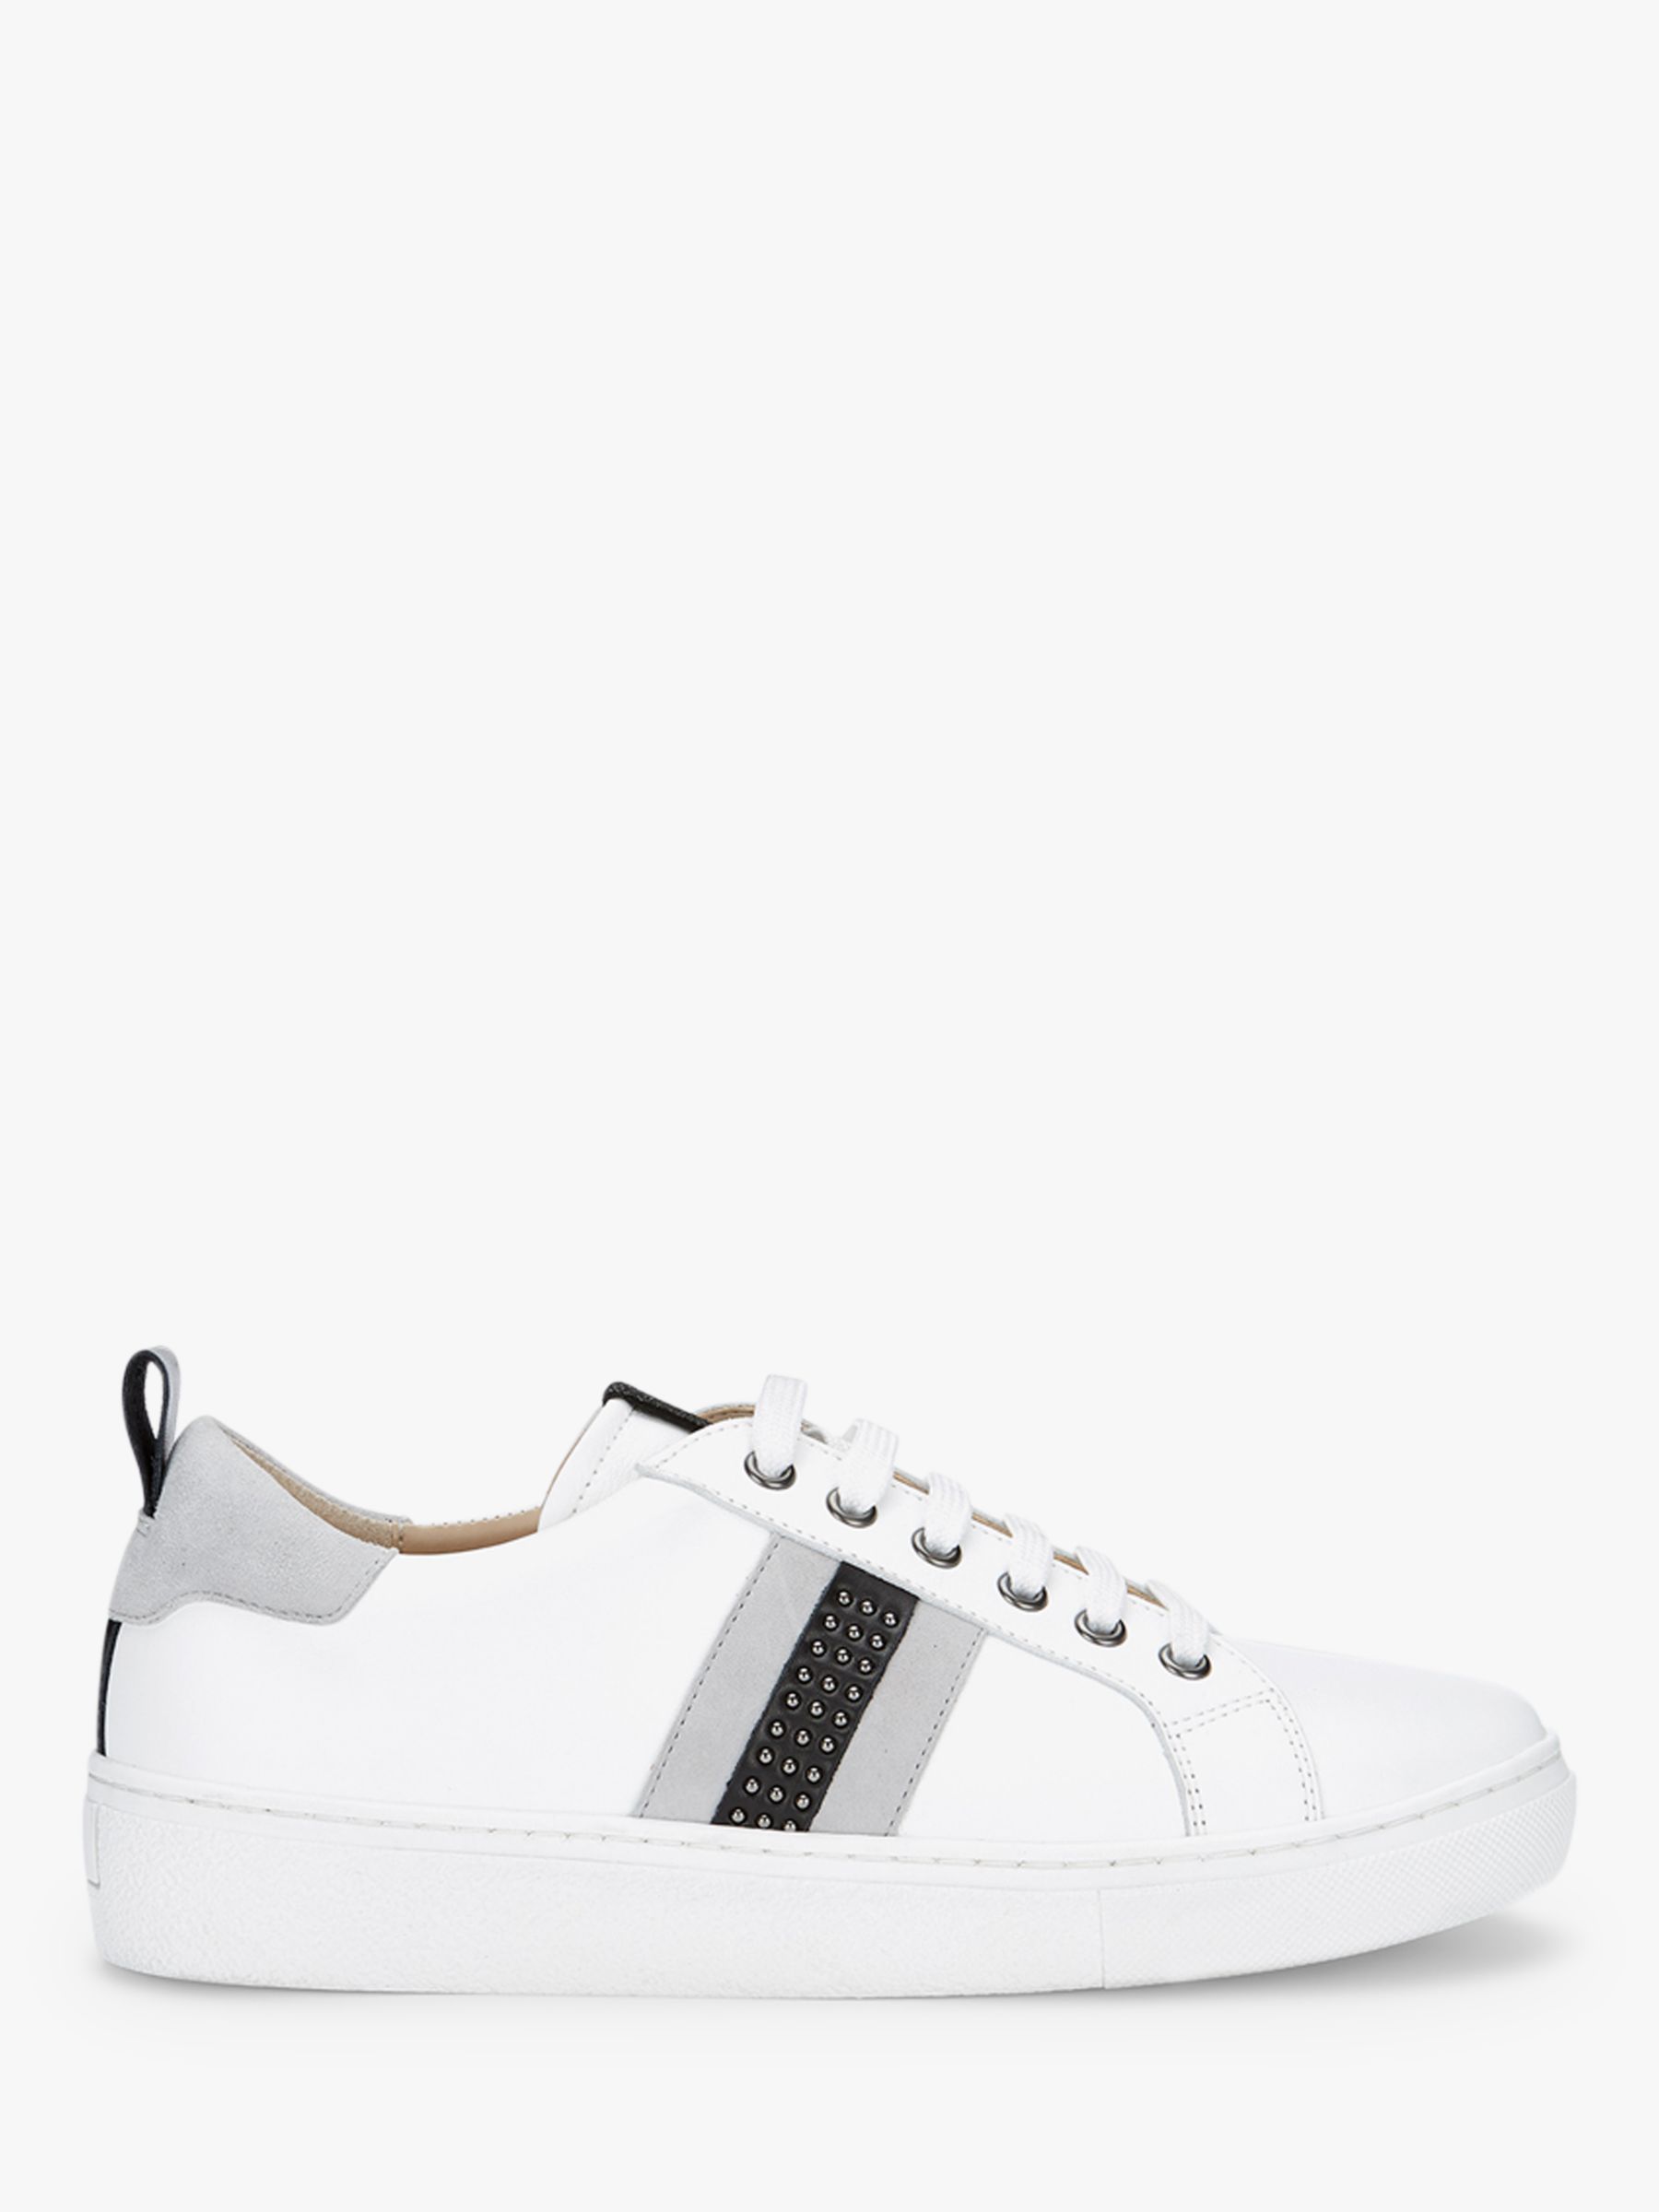 Mint Velvet Allie Stud Lace Up Leather Trainers, White